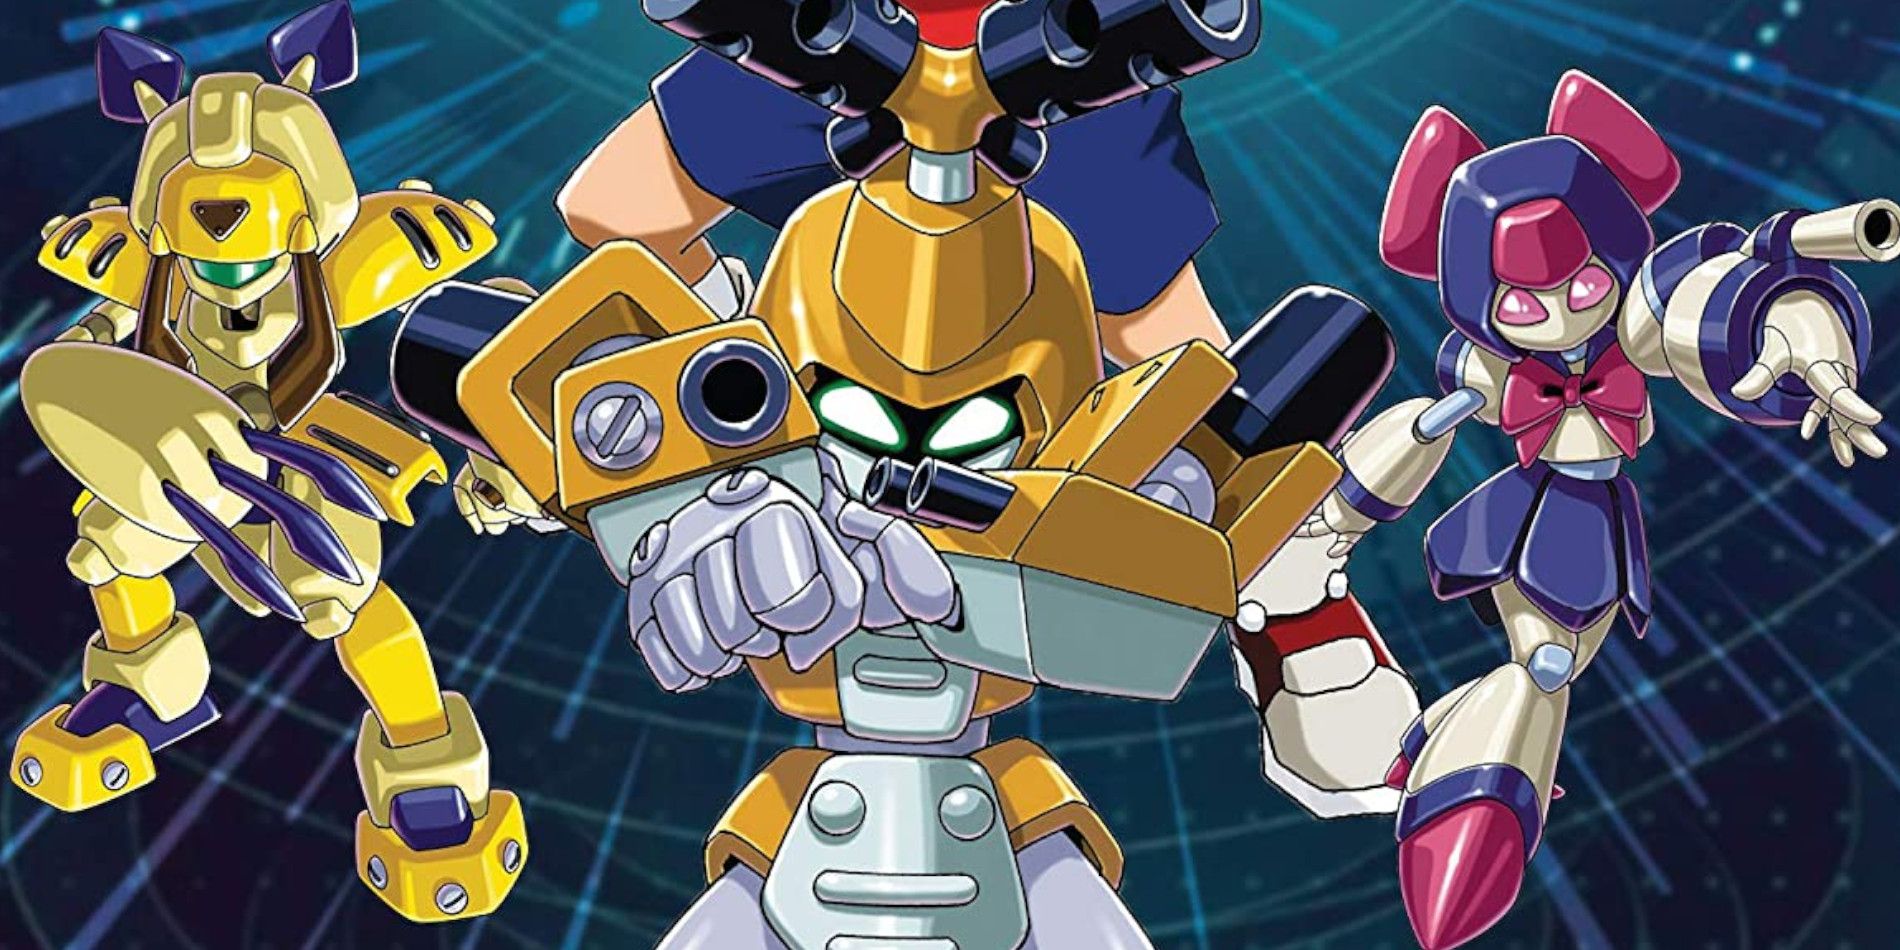 An image from Medabots.